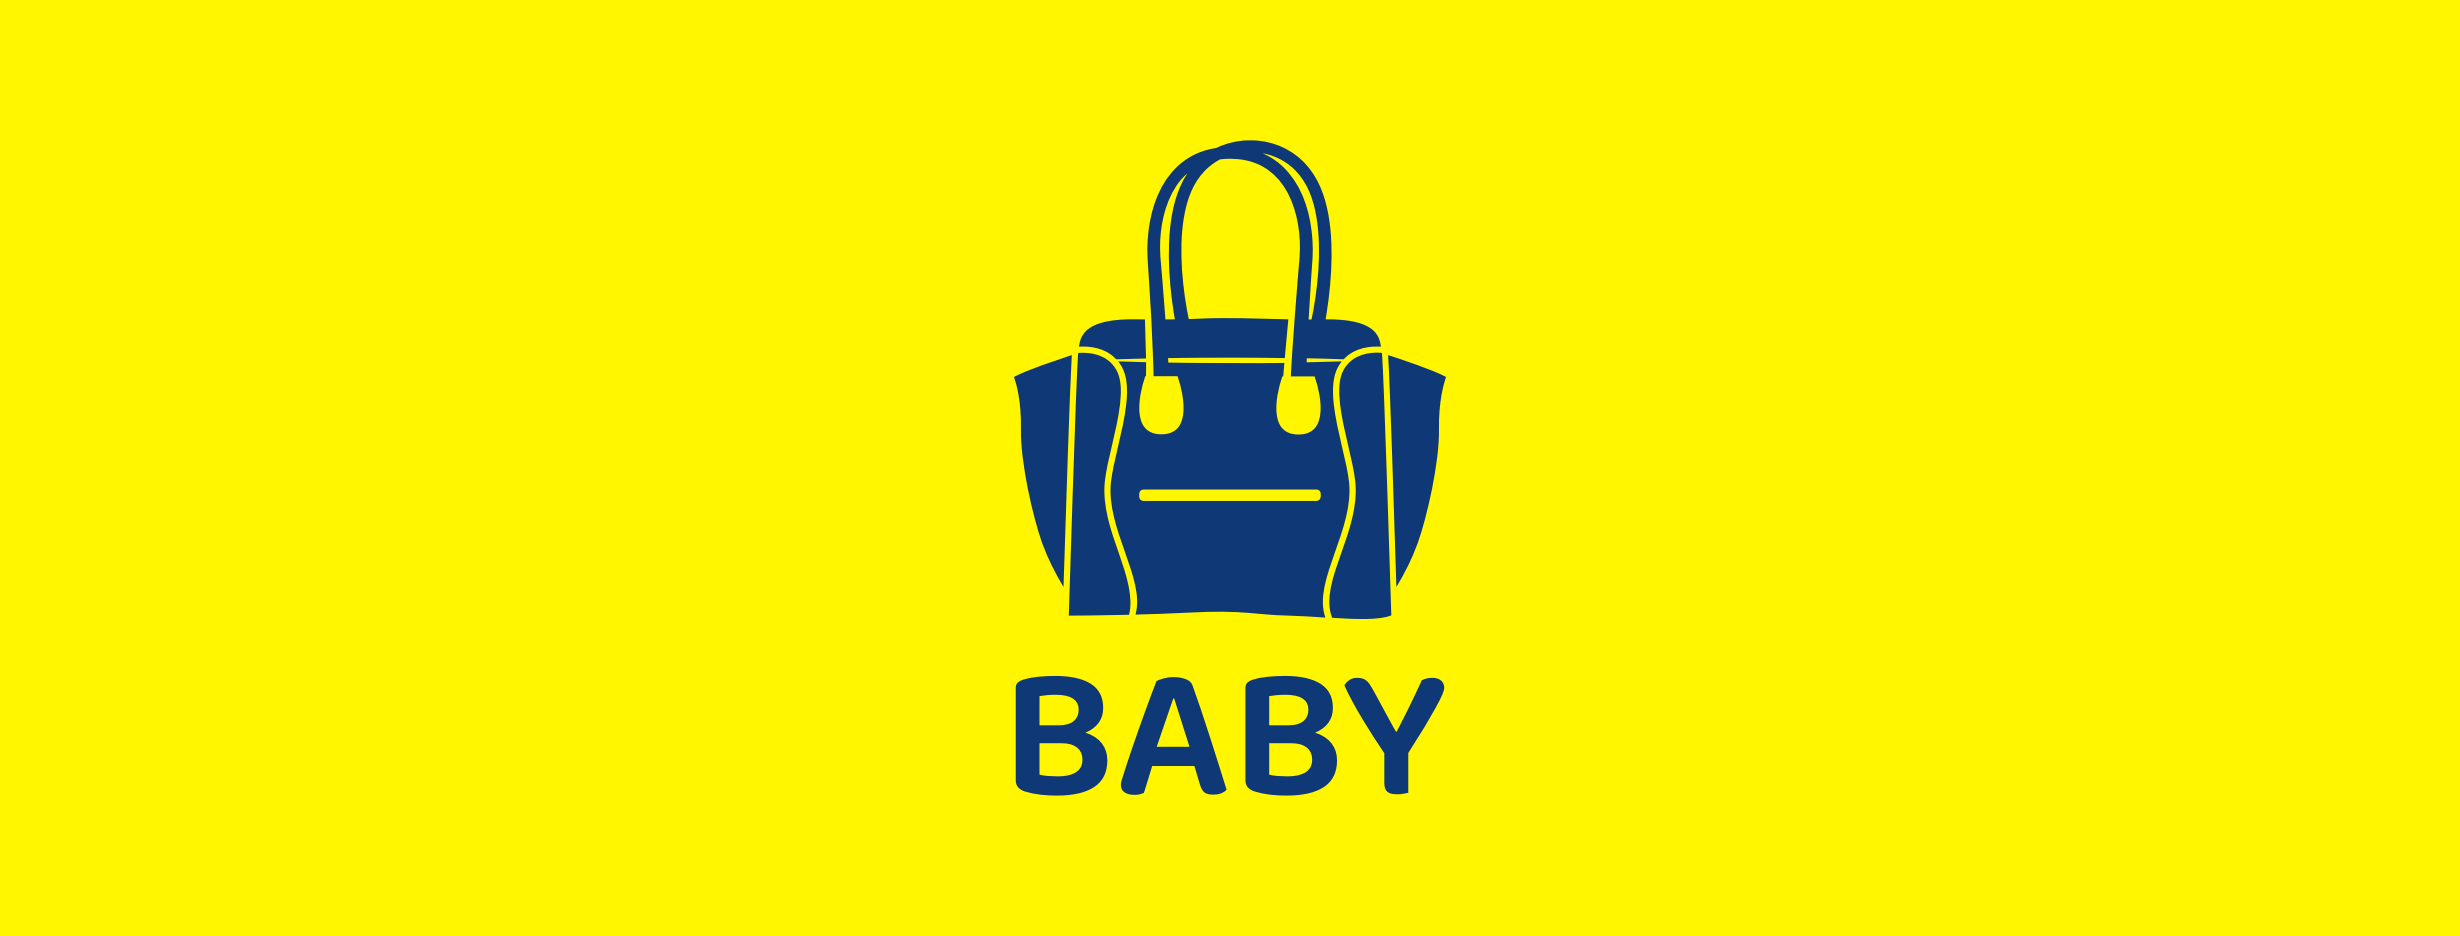 baby bags